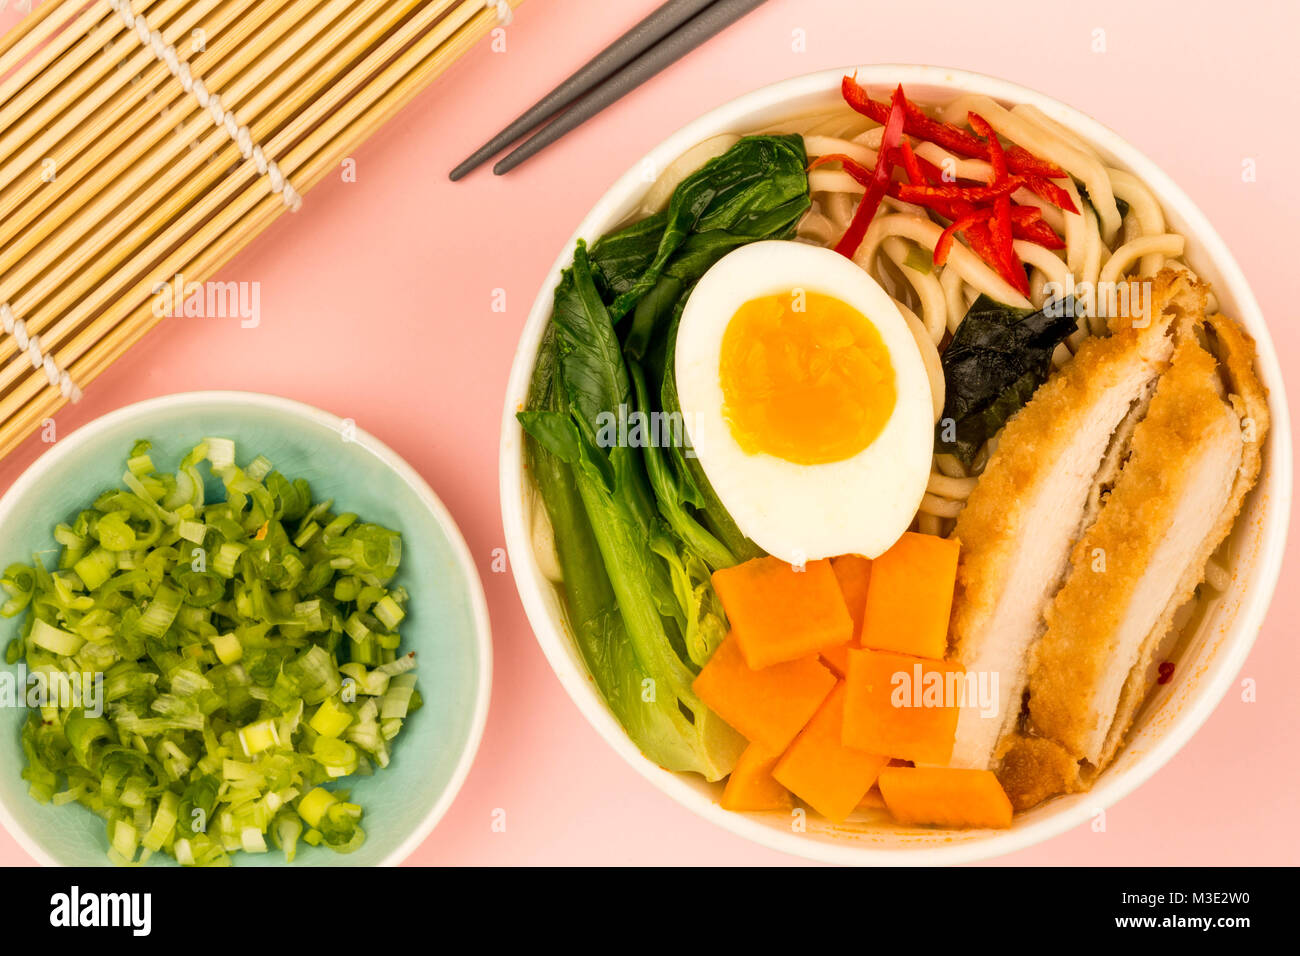 Japanese Style Panko Breadcrumbs Chicken And Noodle Broth or Soup With Sweet Potatoes Against A Pale Pink Background Stock Photo